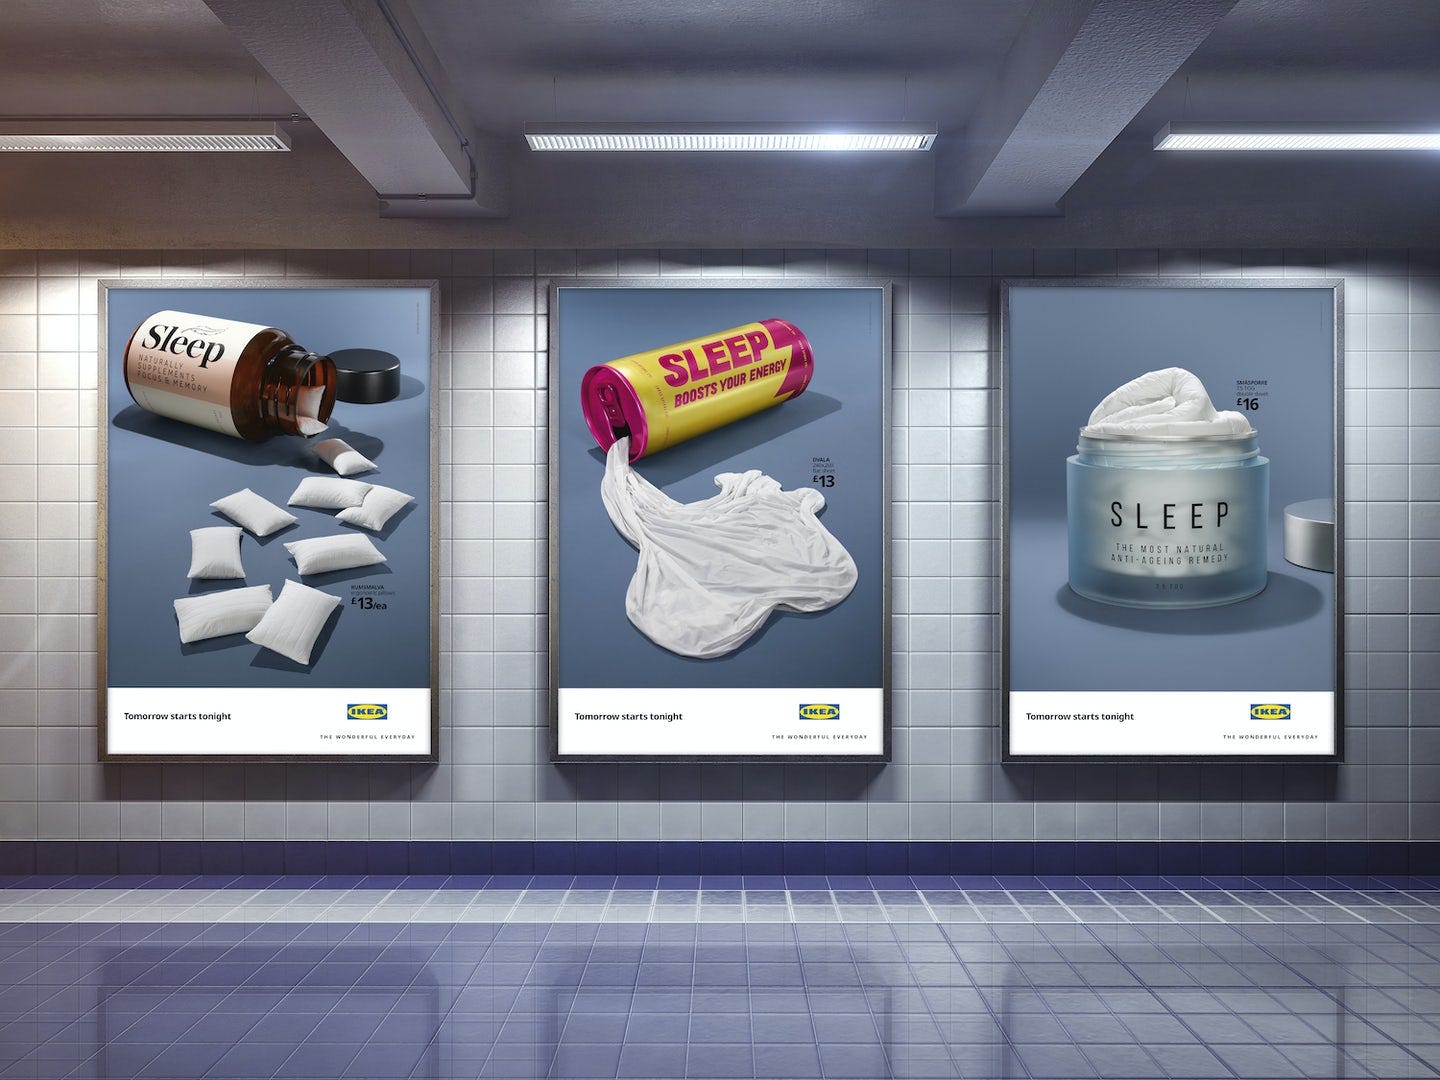 Ikea adds to its sleep campaign with a series of striking posters